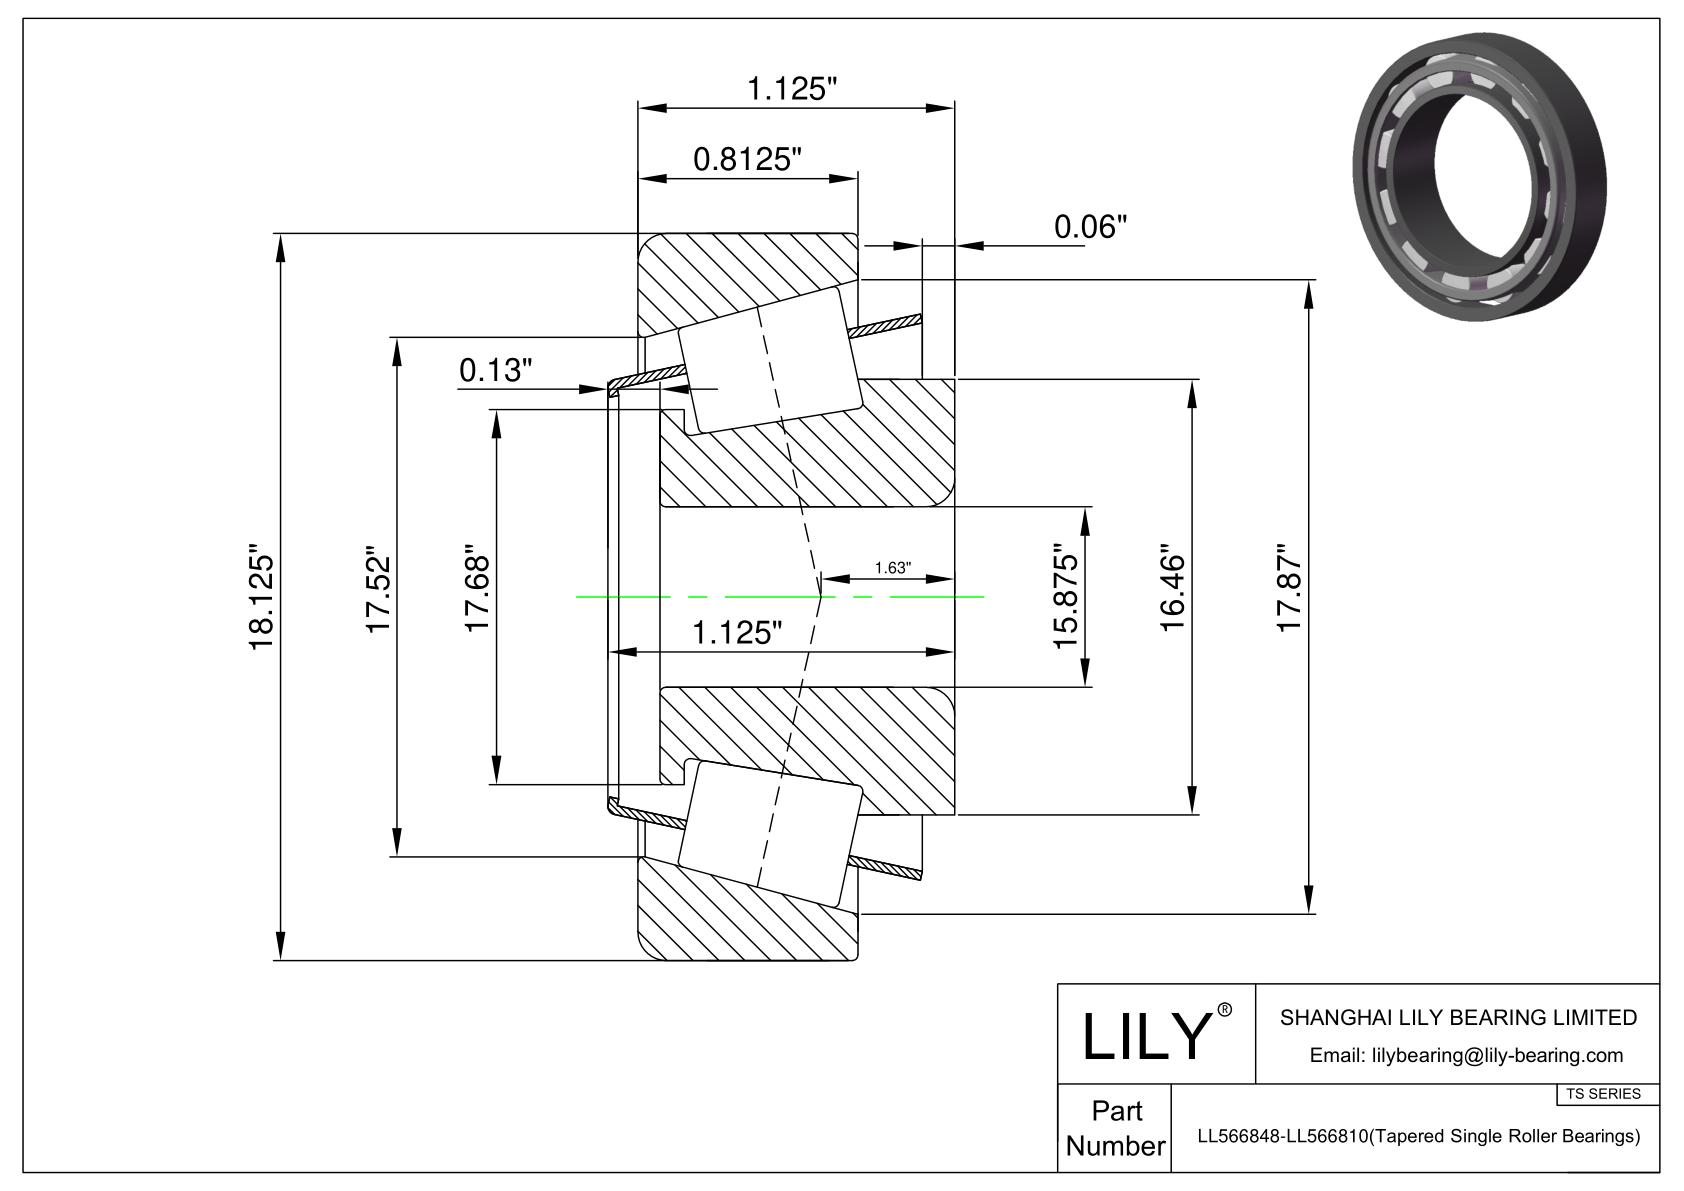 LL566848-LL566810 TS (Tapered Single Roller Bearings) (Imperial) cad drawing